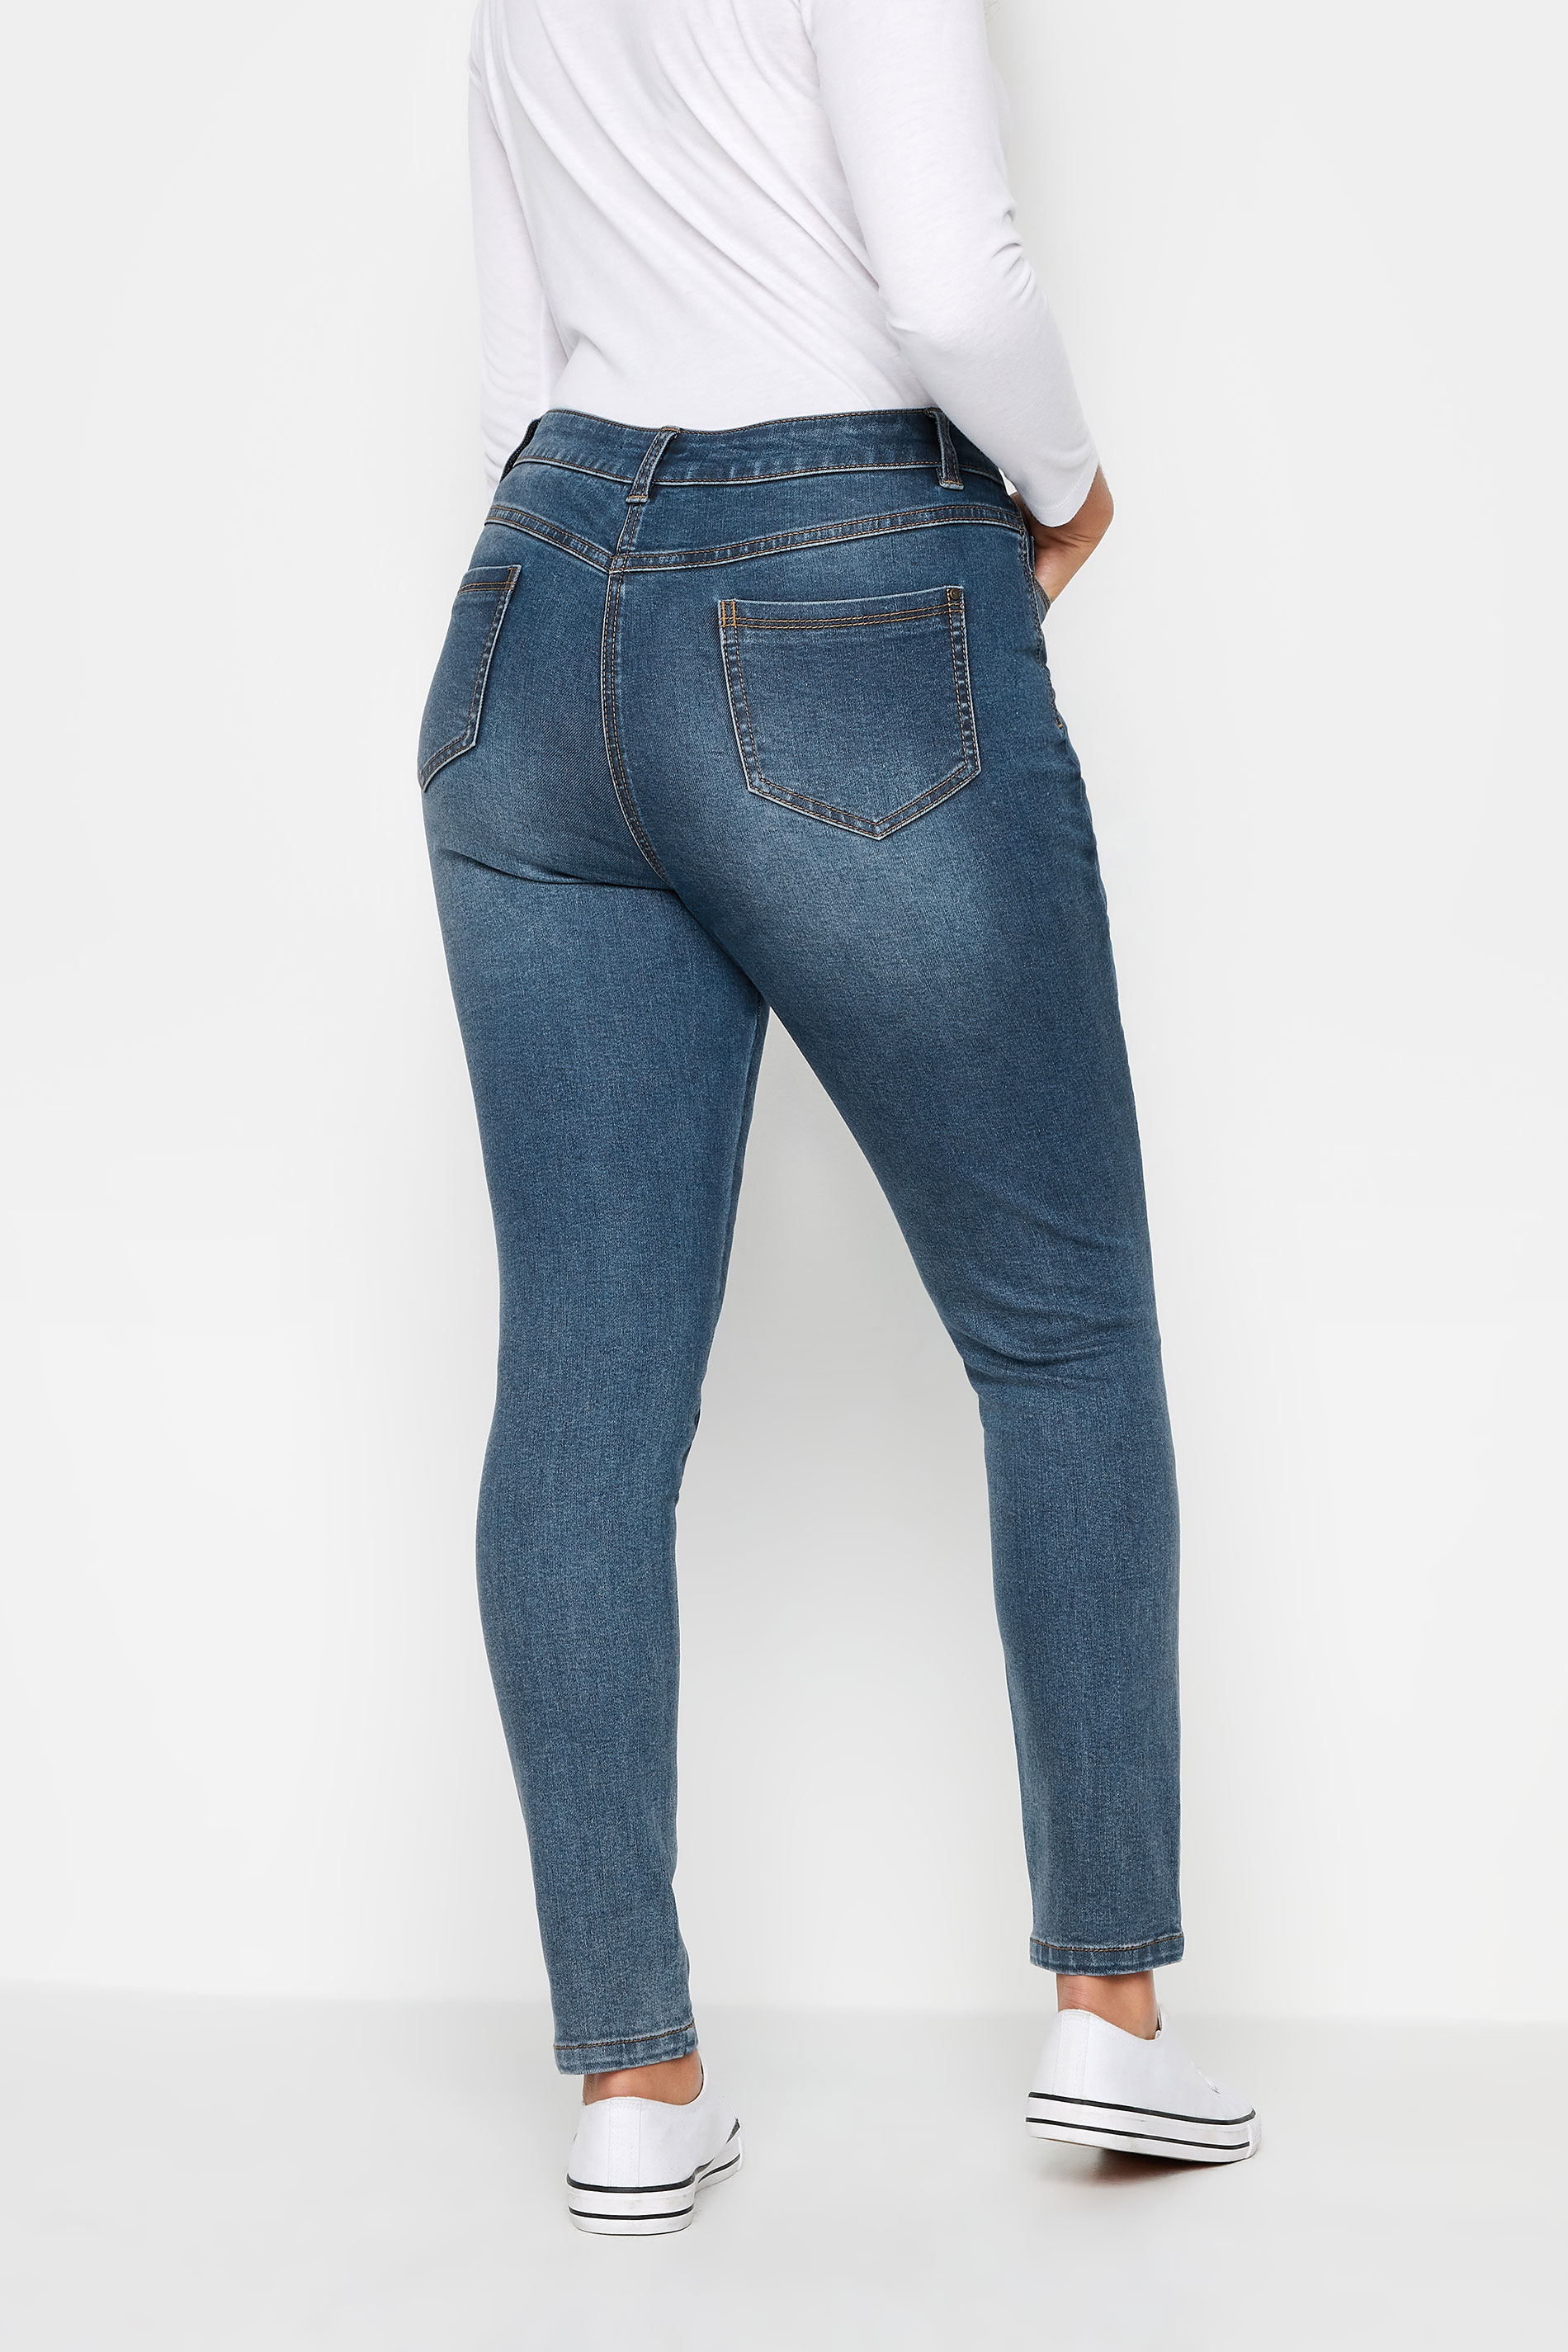 M&Co Blue Mid Wash Skinny Jeans | M&Co 3